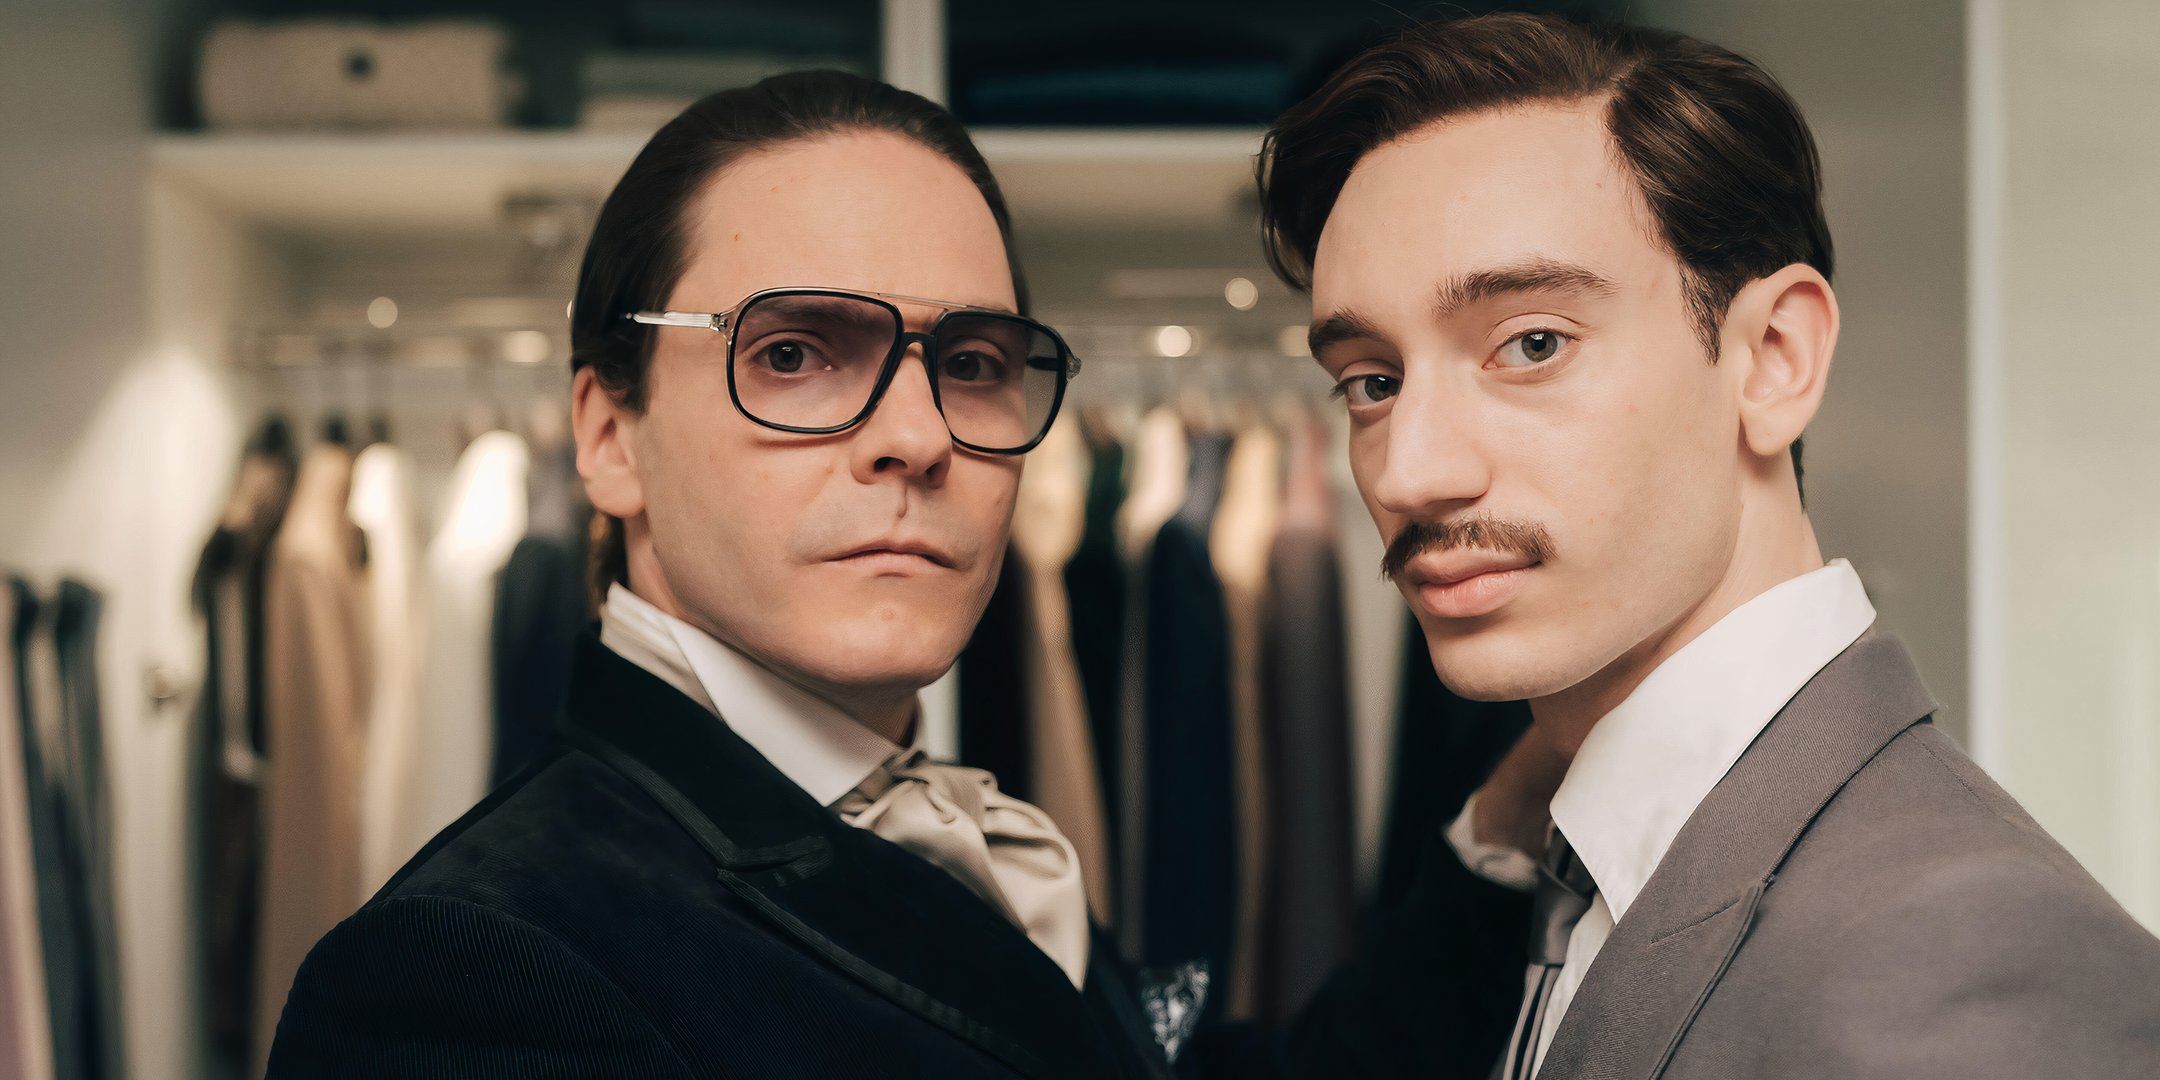 Daniel Brühl as Karl Lagerfeld and Théodore Pellerin as Jacques de Bascher at a tailor in Becoming Karl Lagerfeld